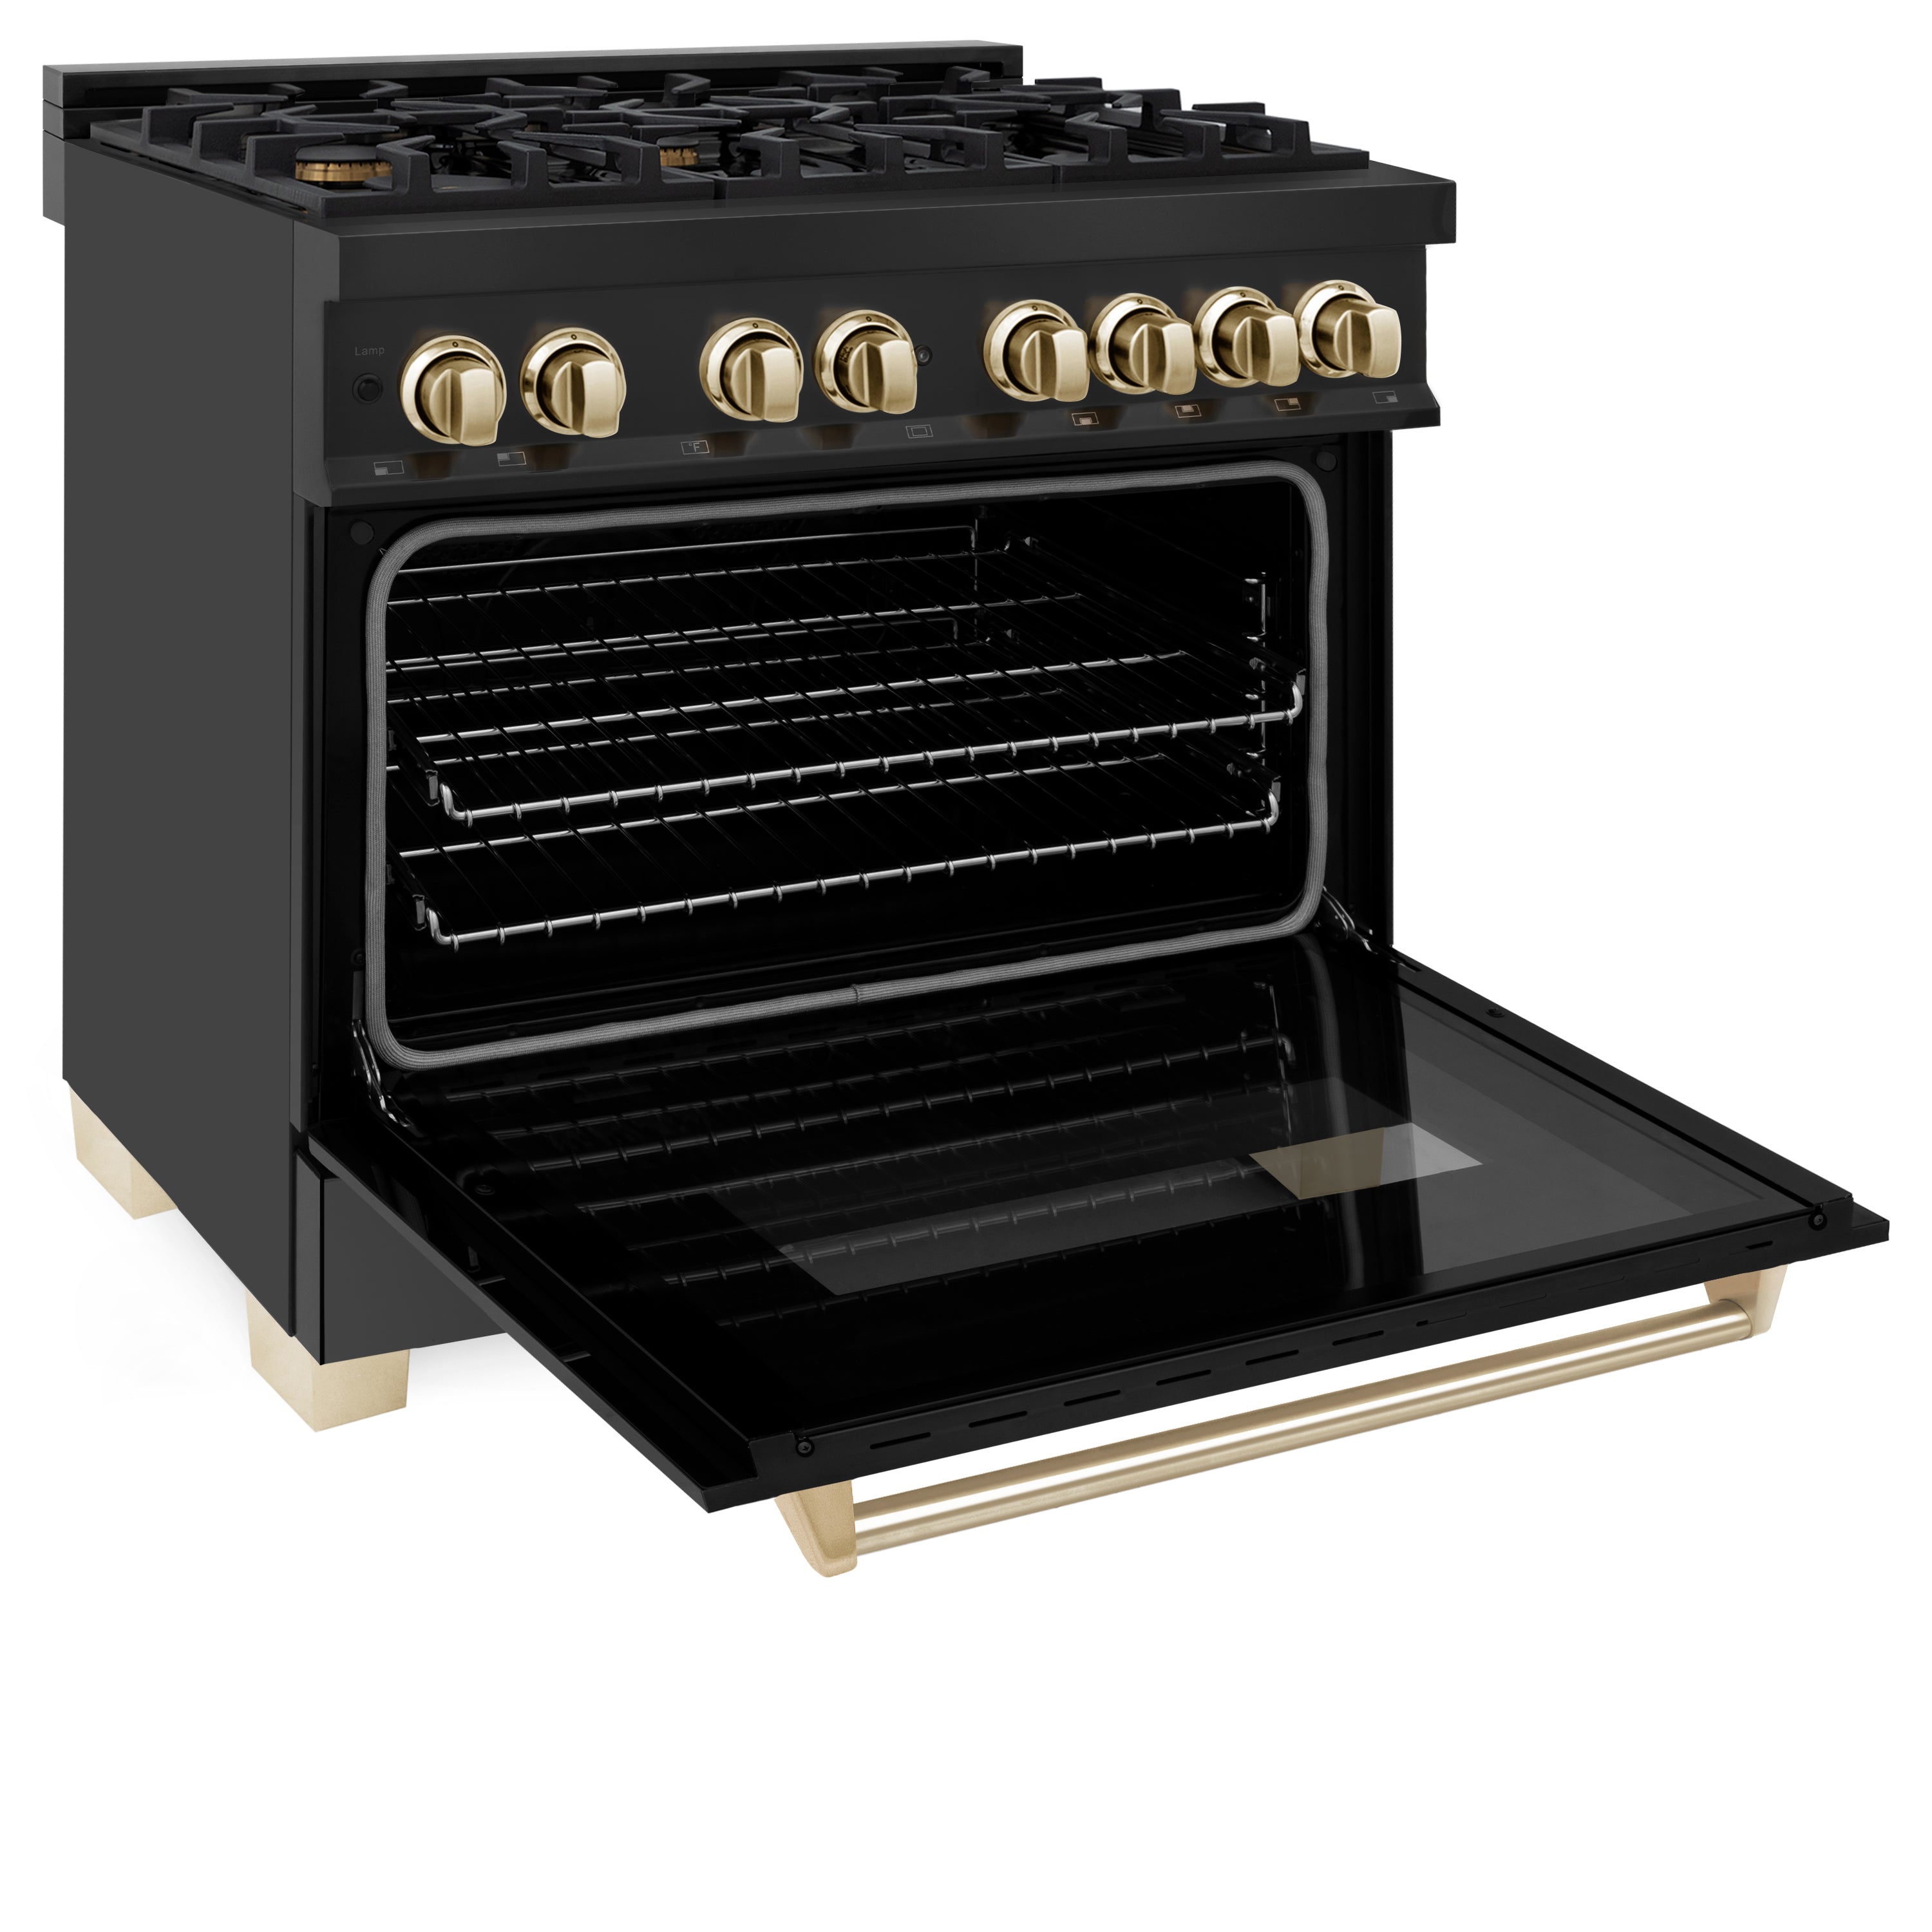 ZLINE Autograph Edition 36" 4.6 cu. ft. Dual Fuel Range with Gas Stove and Electric Oven in Black Stainless Steel with Polished Gold Accents (RABZ-36-G)